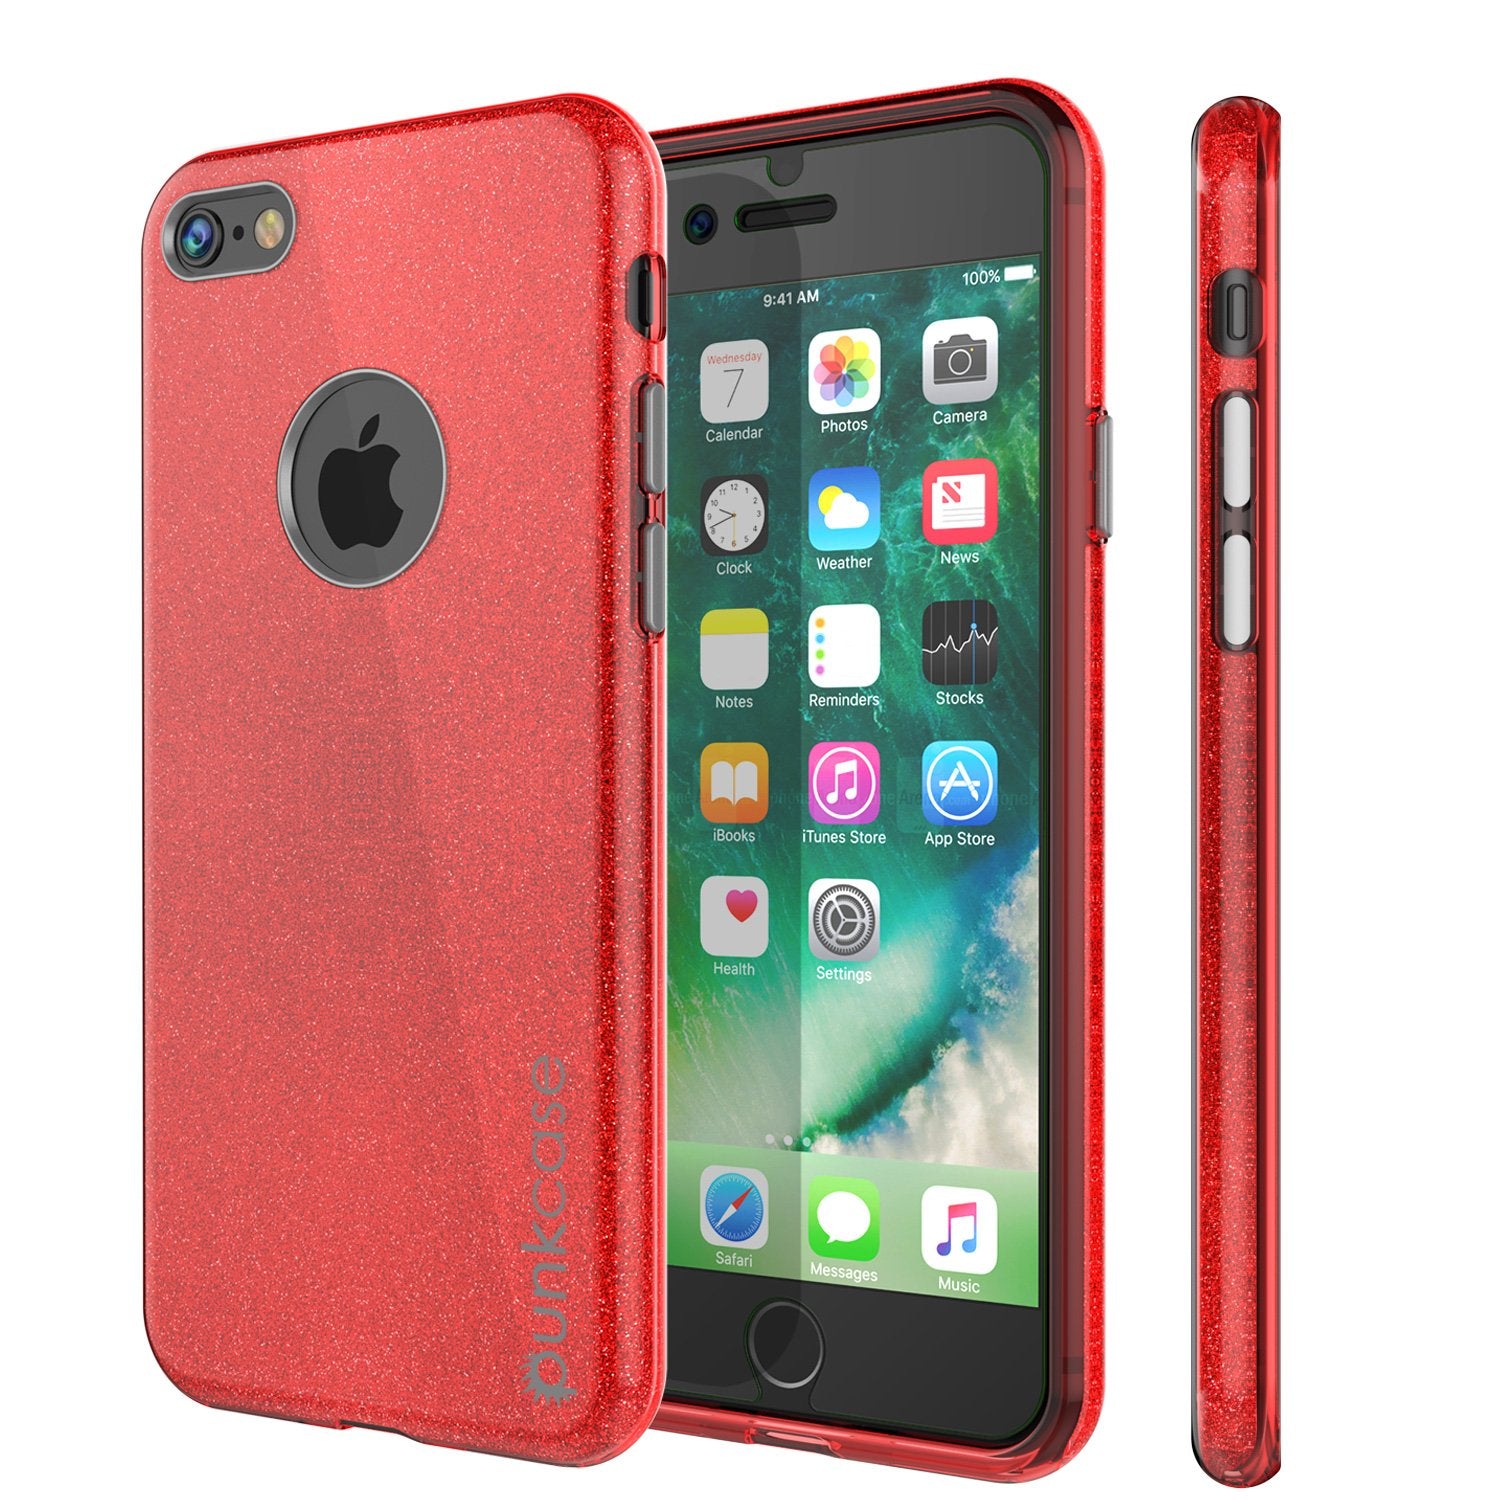 iPhone 8 Case, Punkcase Galactic 2.0 Series Ultra Slim Protective Armor TPU Cover [Red] - PunkCase NZ